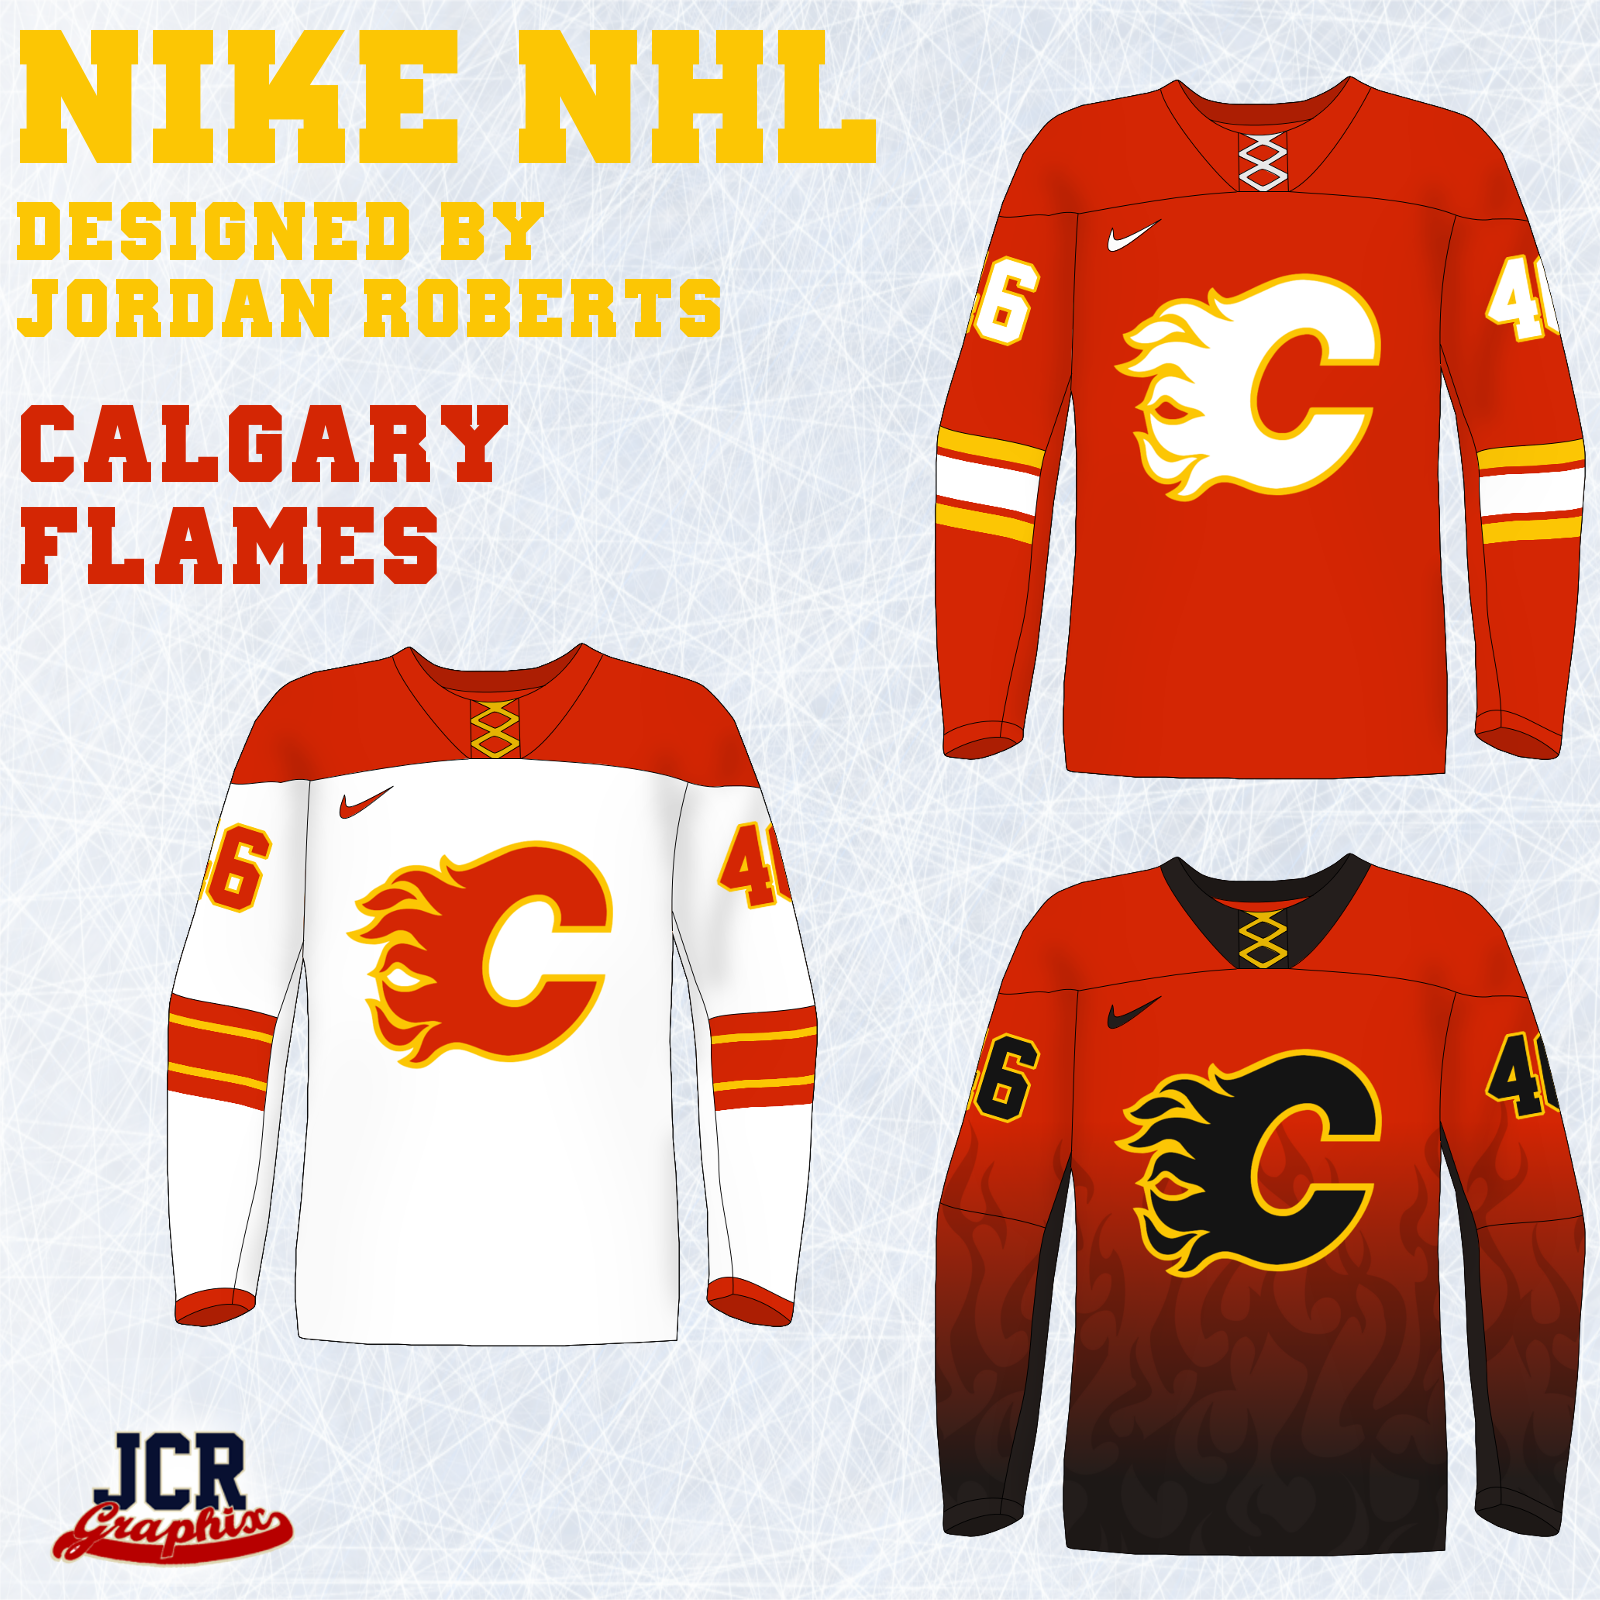 NHL Nike Jerseys - Wild and Blue Jackets added - Page 2 ...